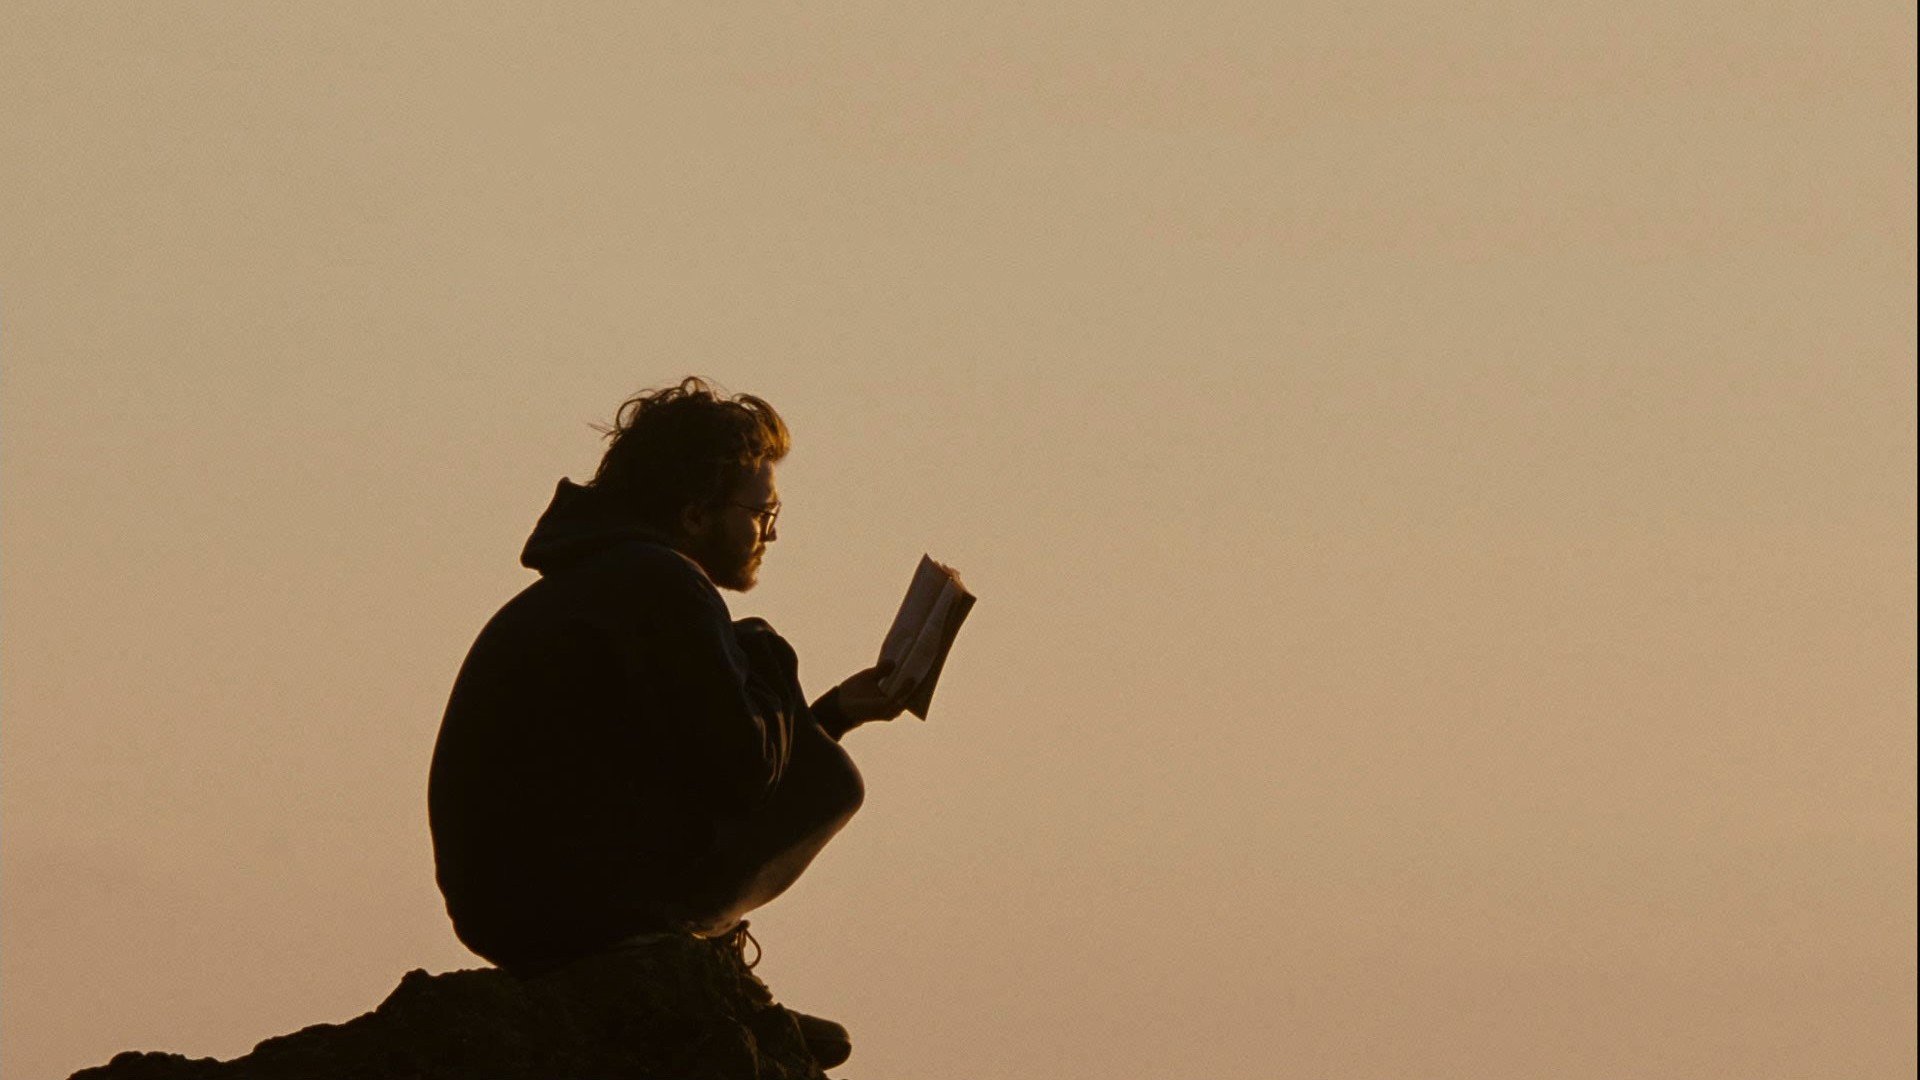 Essay into the wild chris mccandless | College paper Writing Service